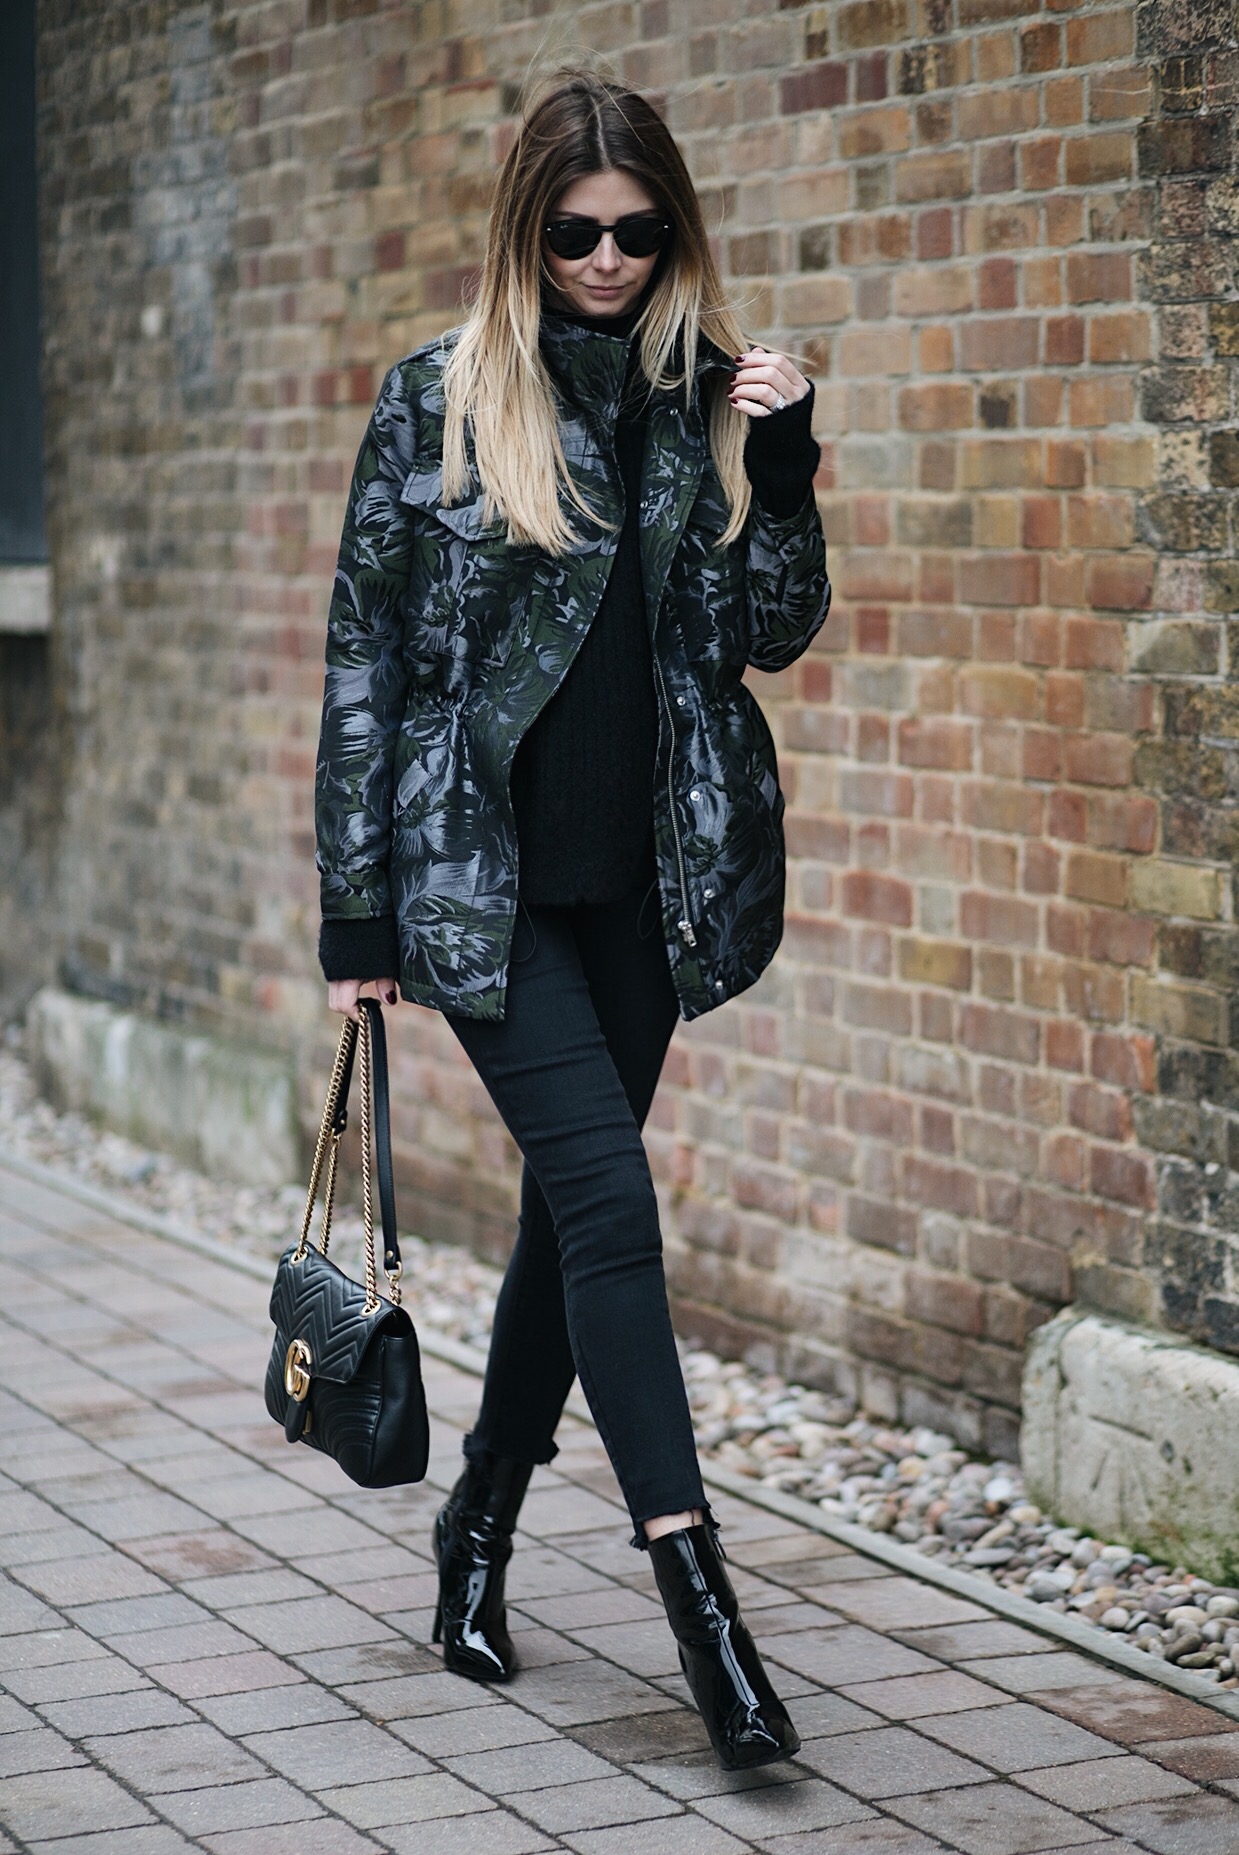 Emma Hill - EJSTYLE wears khaki & silver floral jacquard jacket, black sweater, medium Gucci Marmont bag. black Paige skinny jeans, patent pic vinyl ankle boots, winter outfit